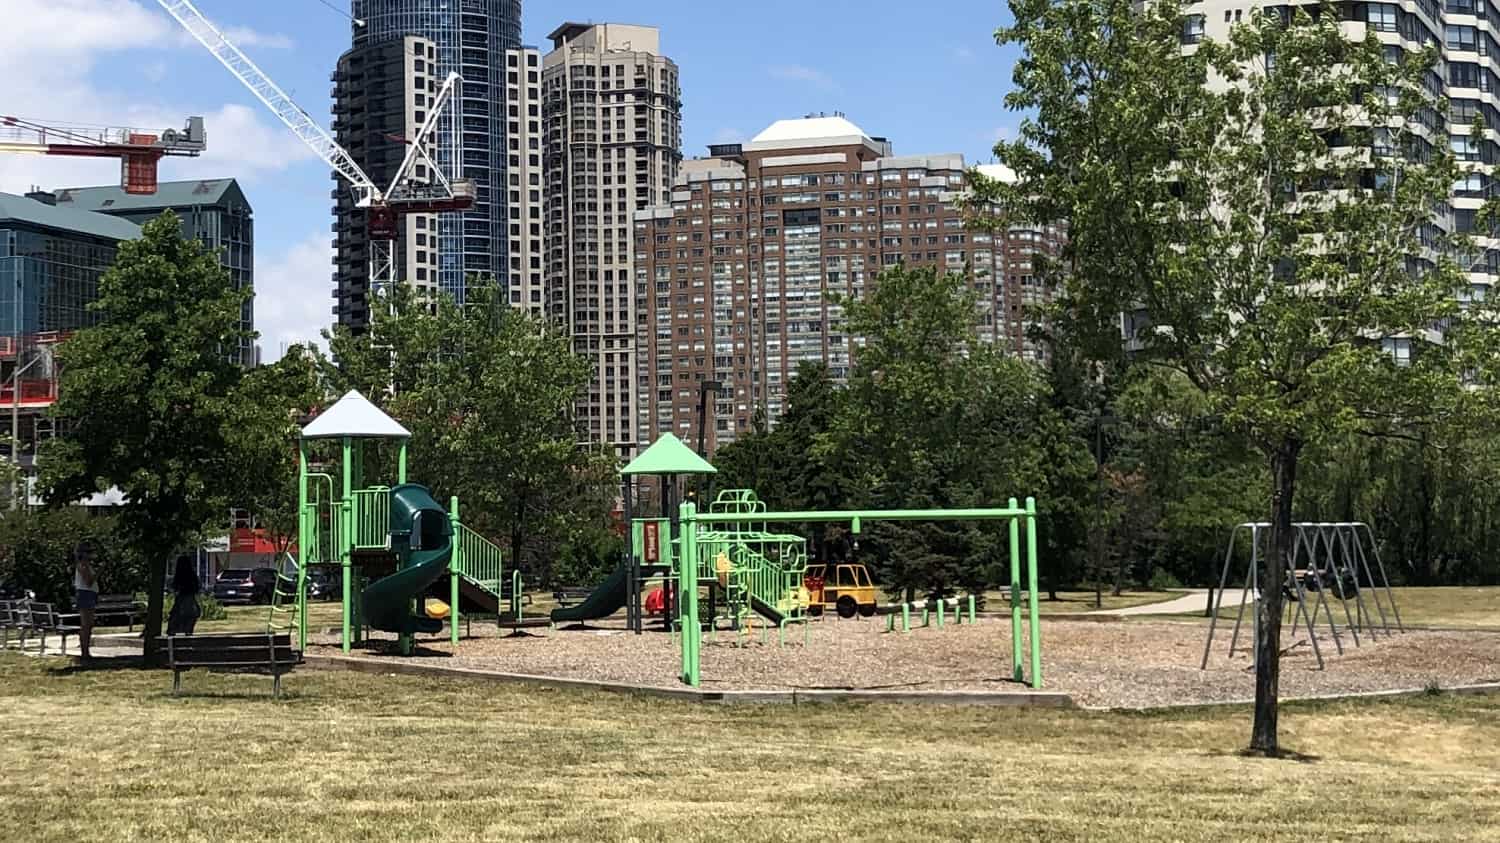 Mississauga plans to build two new parks in the downtown core